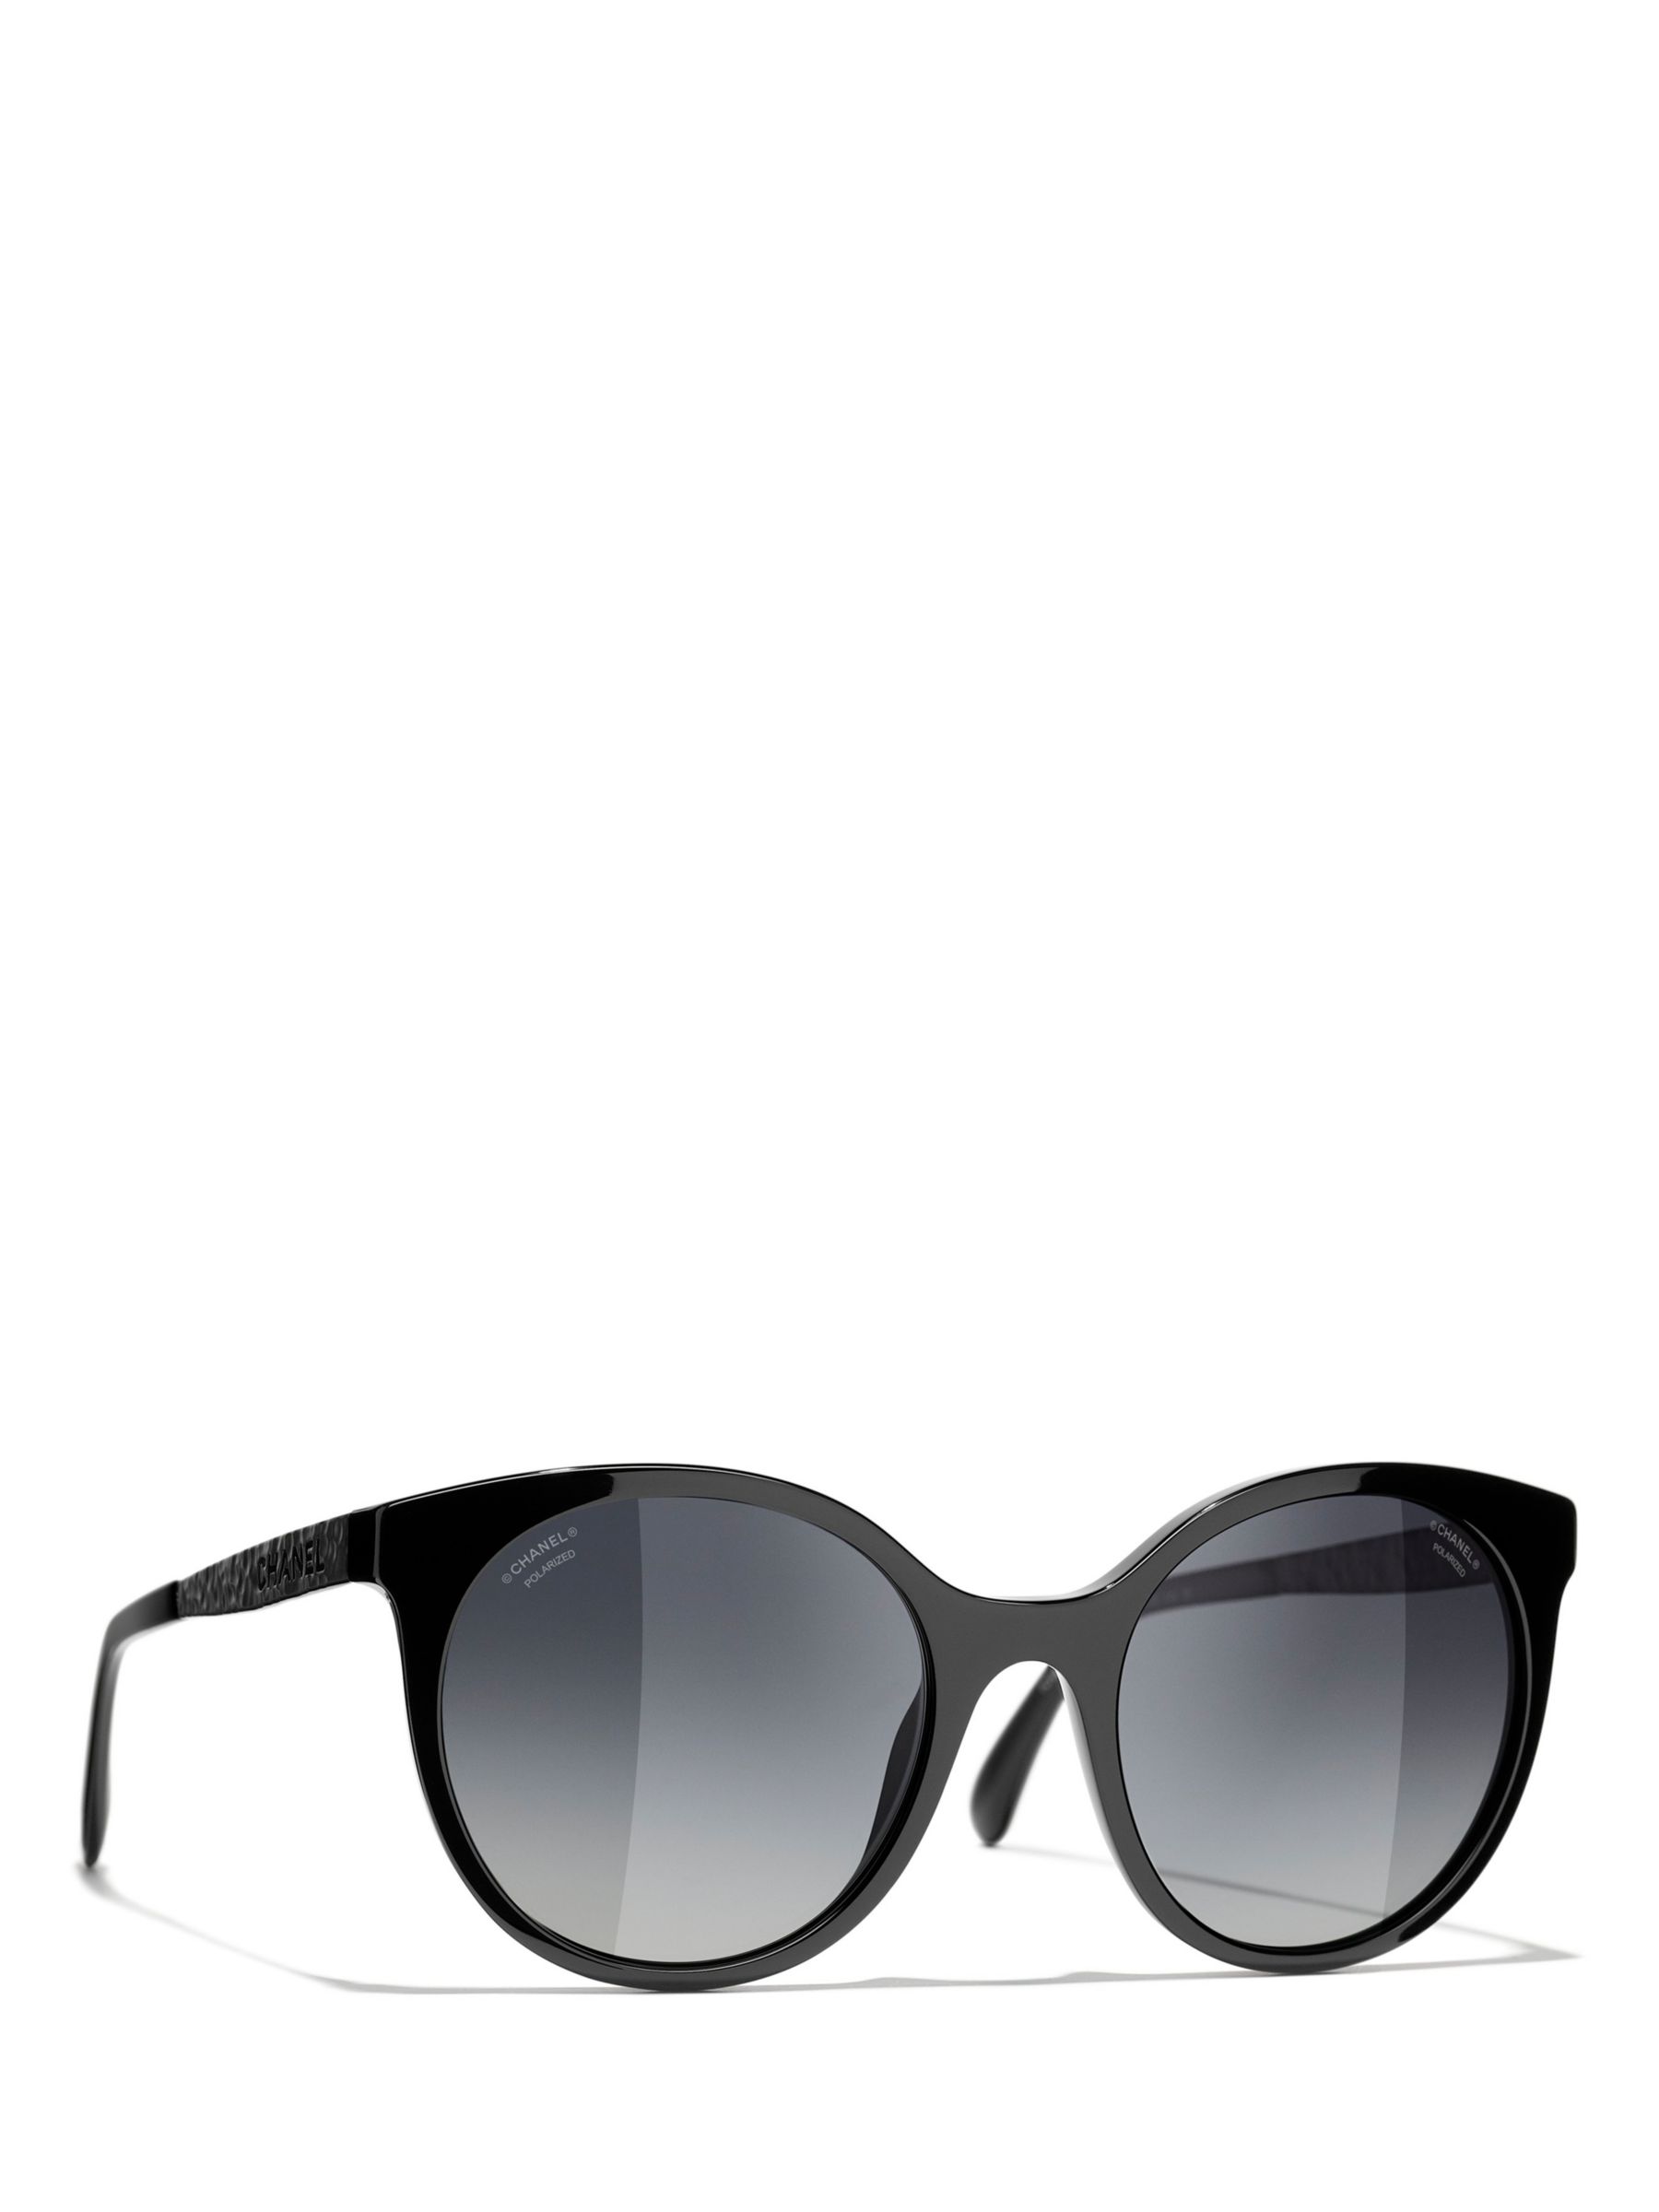 CHANEL Oval Sunglasses CH5440 Black/Grey Gradient at John Lewis